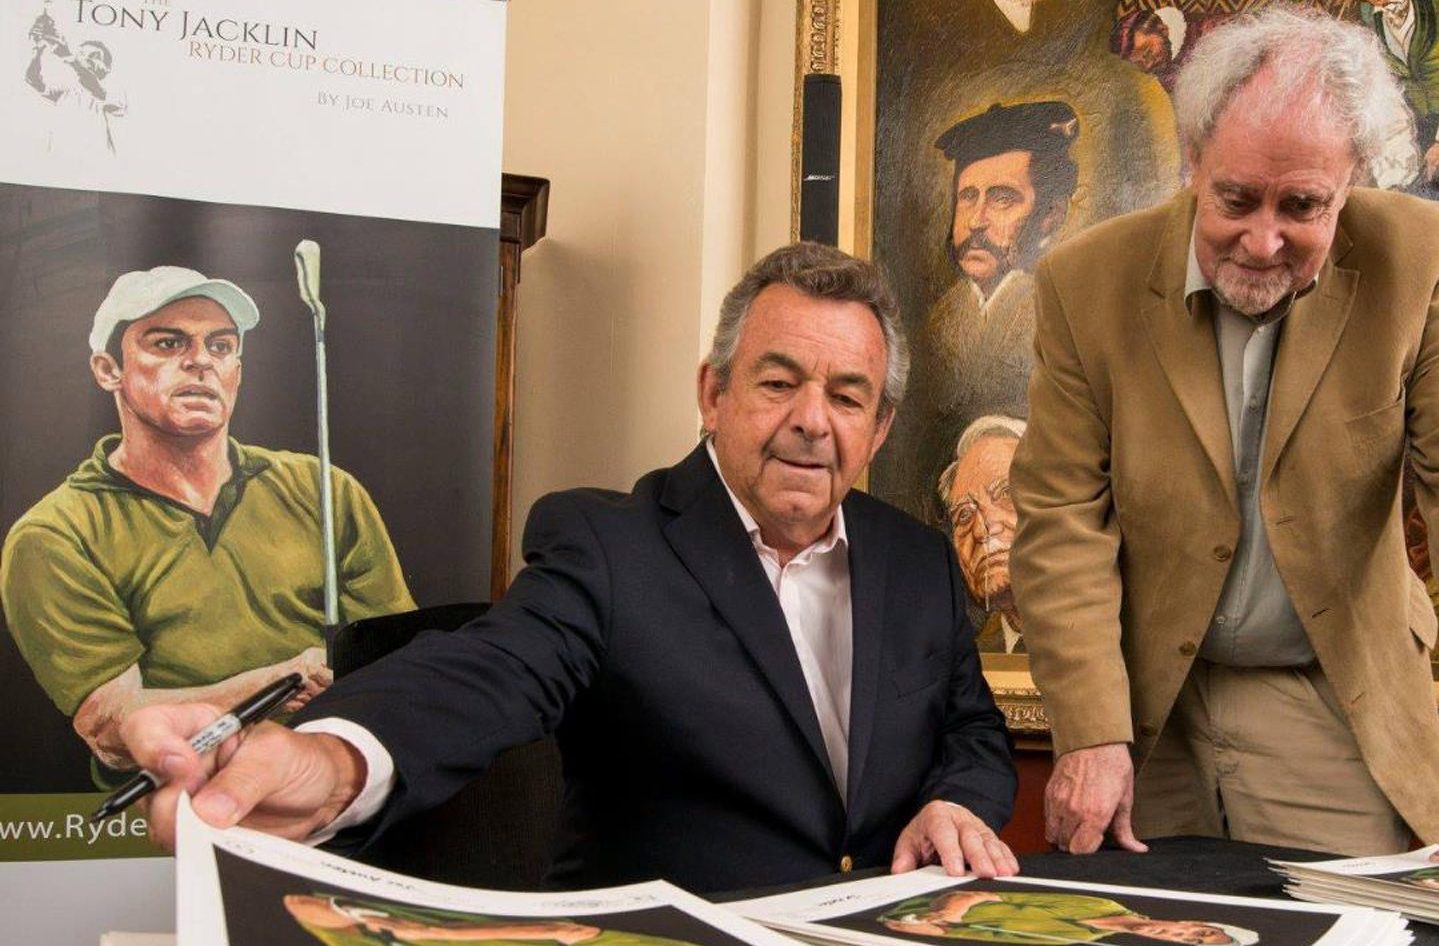 Tony Jacklin signing portraits at a table with Joe Austen leaning beside him